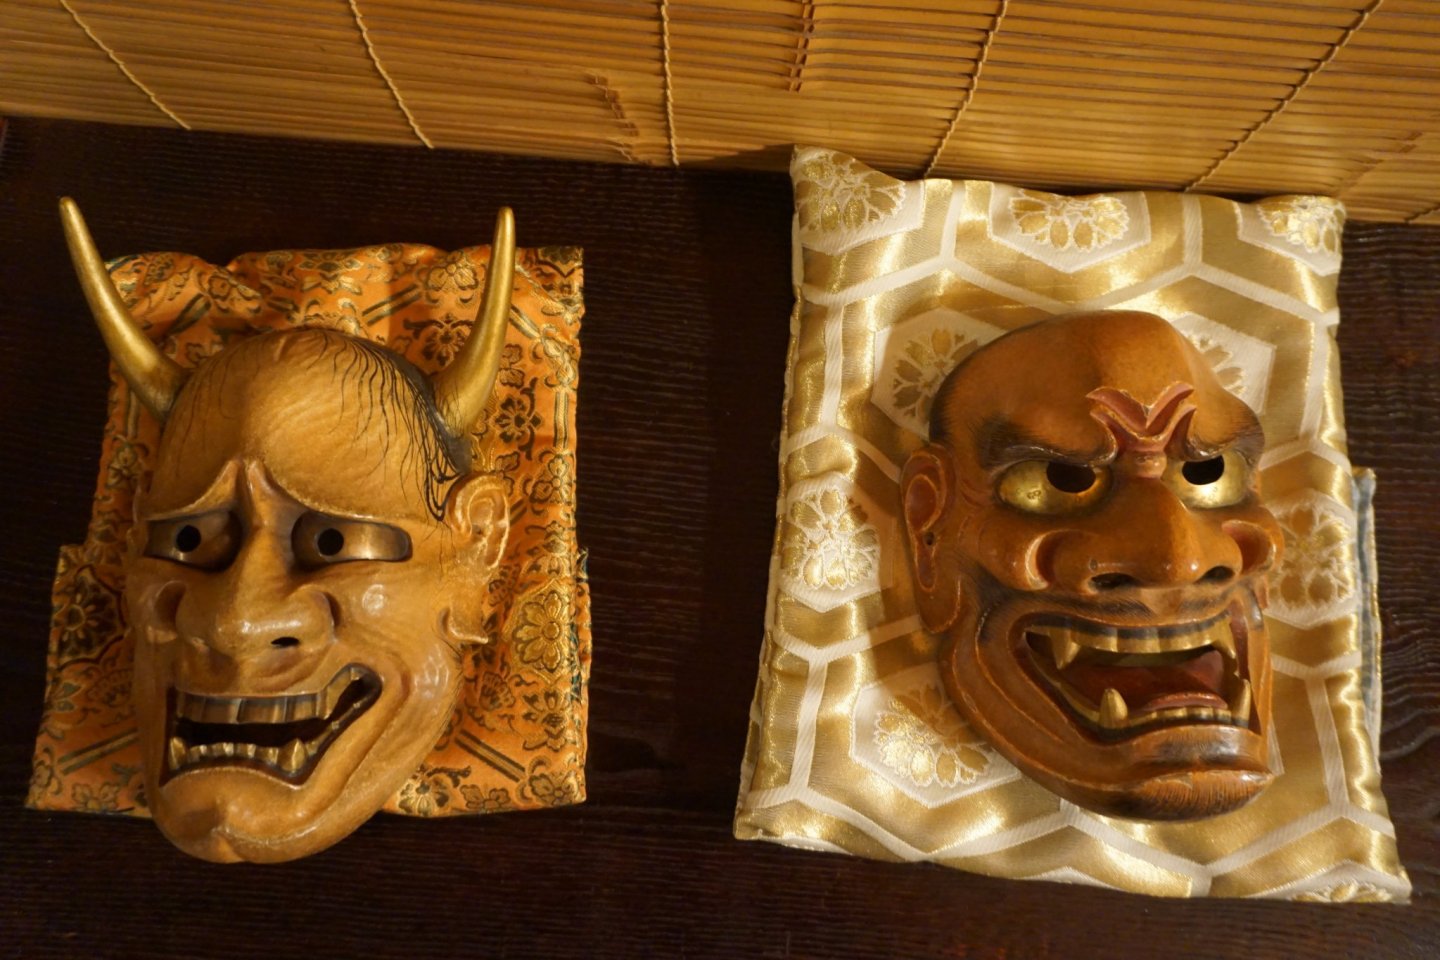 Wooden masks depicting a female demon (left) and an ogre (right)